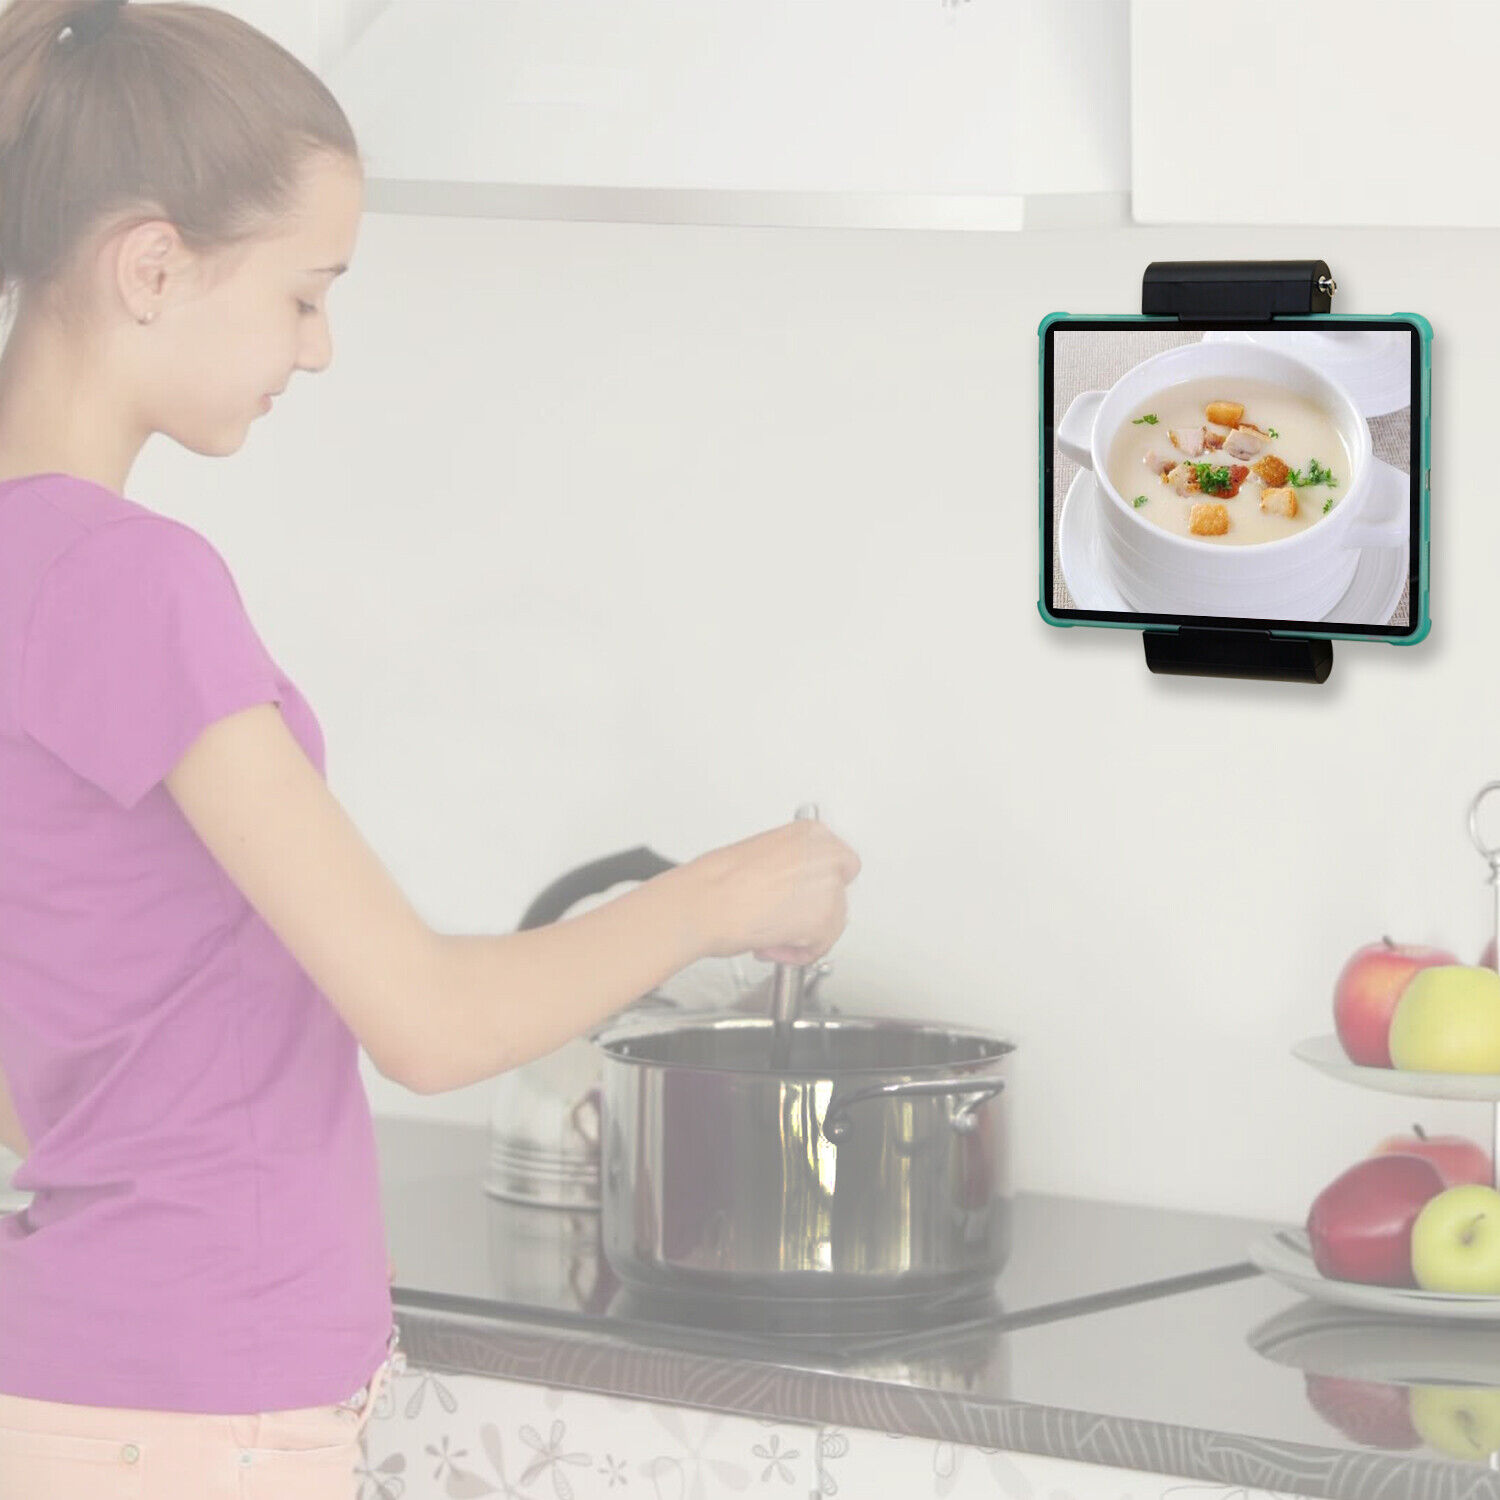 Universal Tablets Kitchen Wall Mount Holder for iPad Air,Mini,iPhone,Kindle Fire